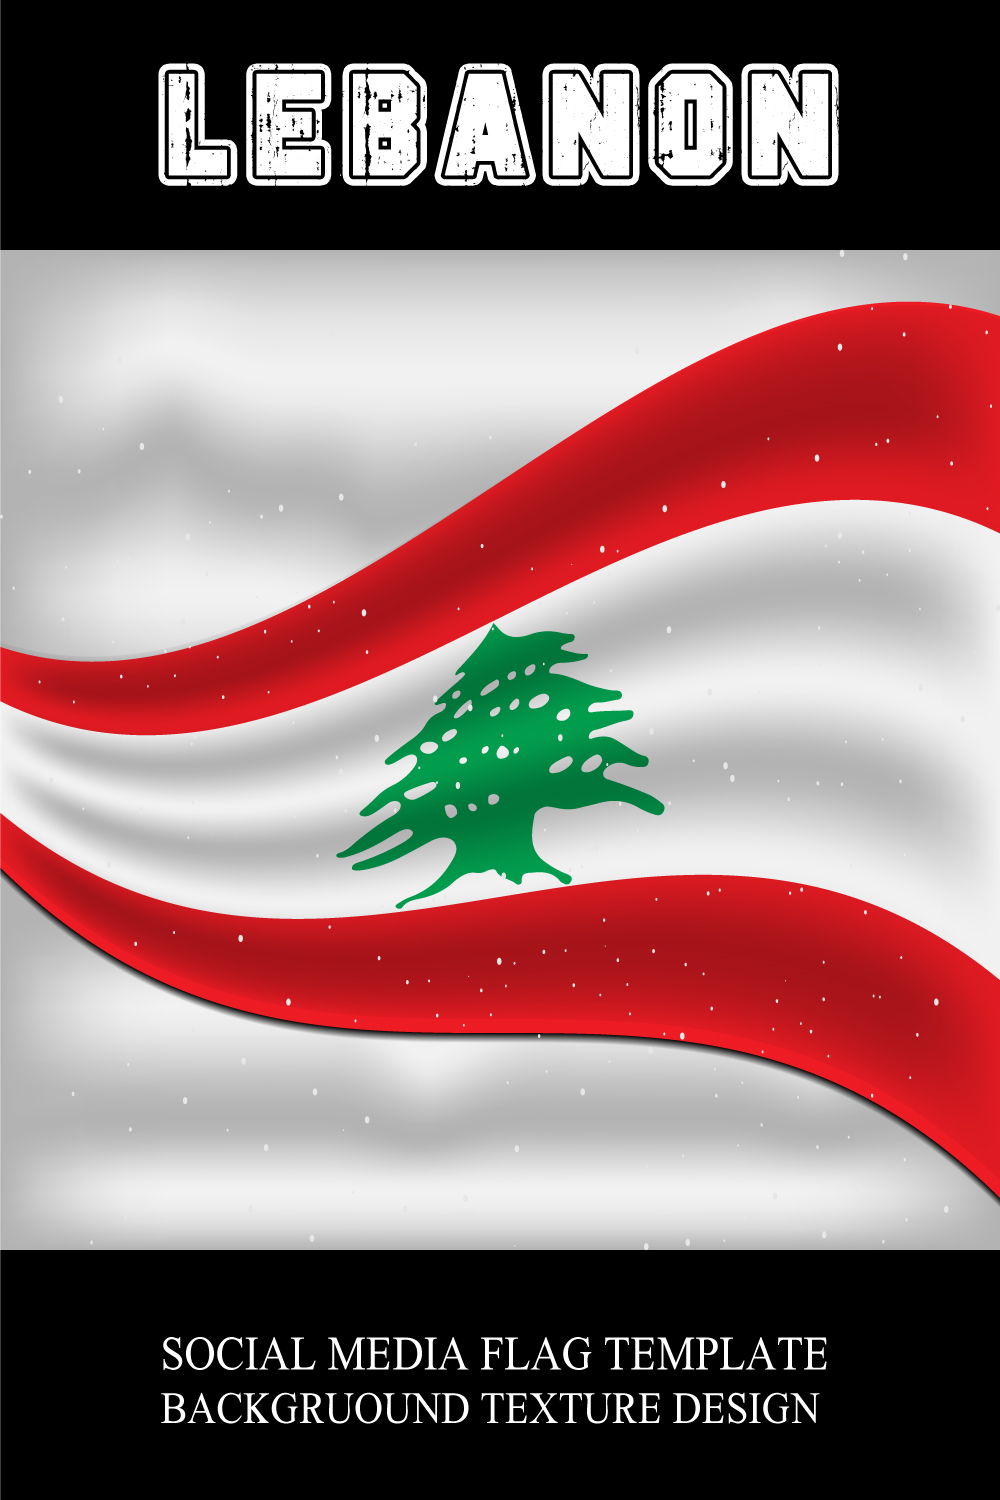 Colorful image of the flag of Lebanon.